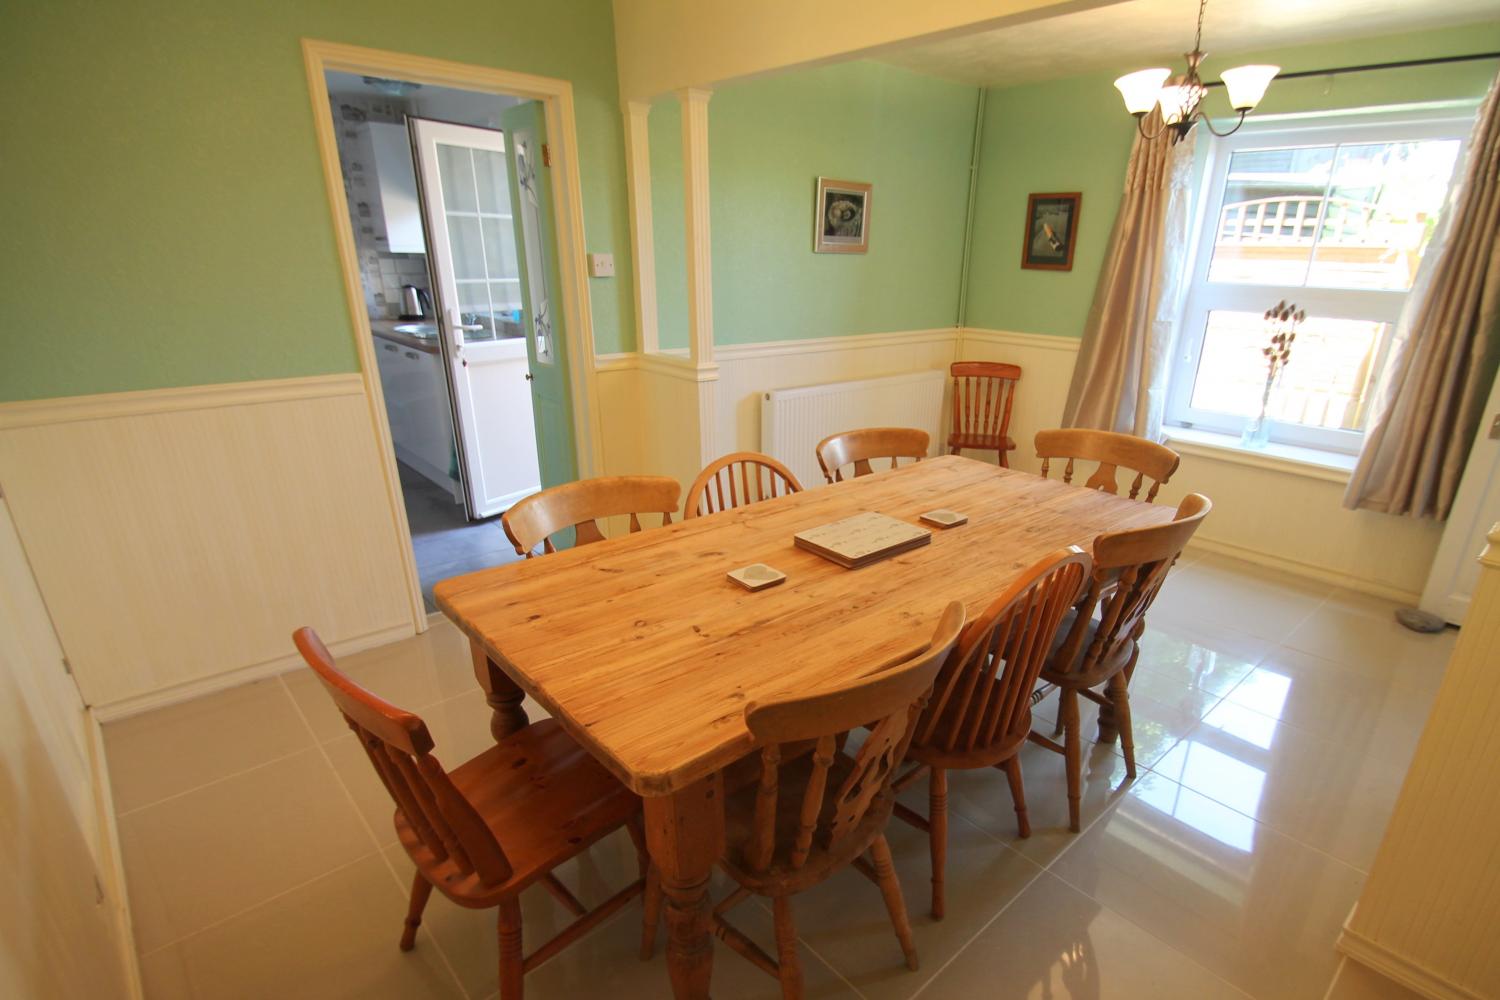 Dining room with seating for 8.